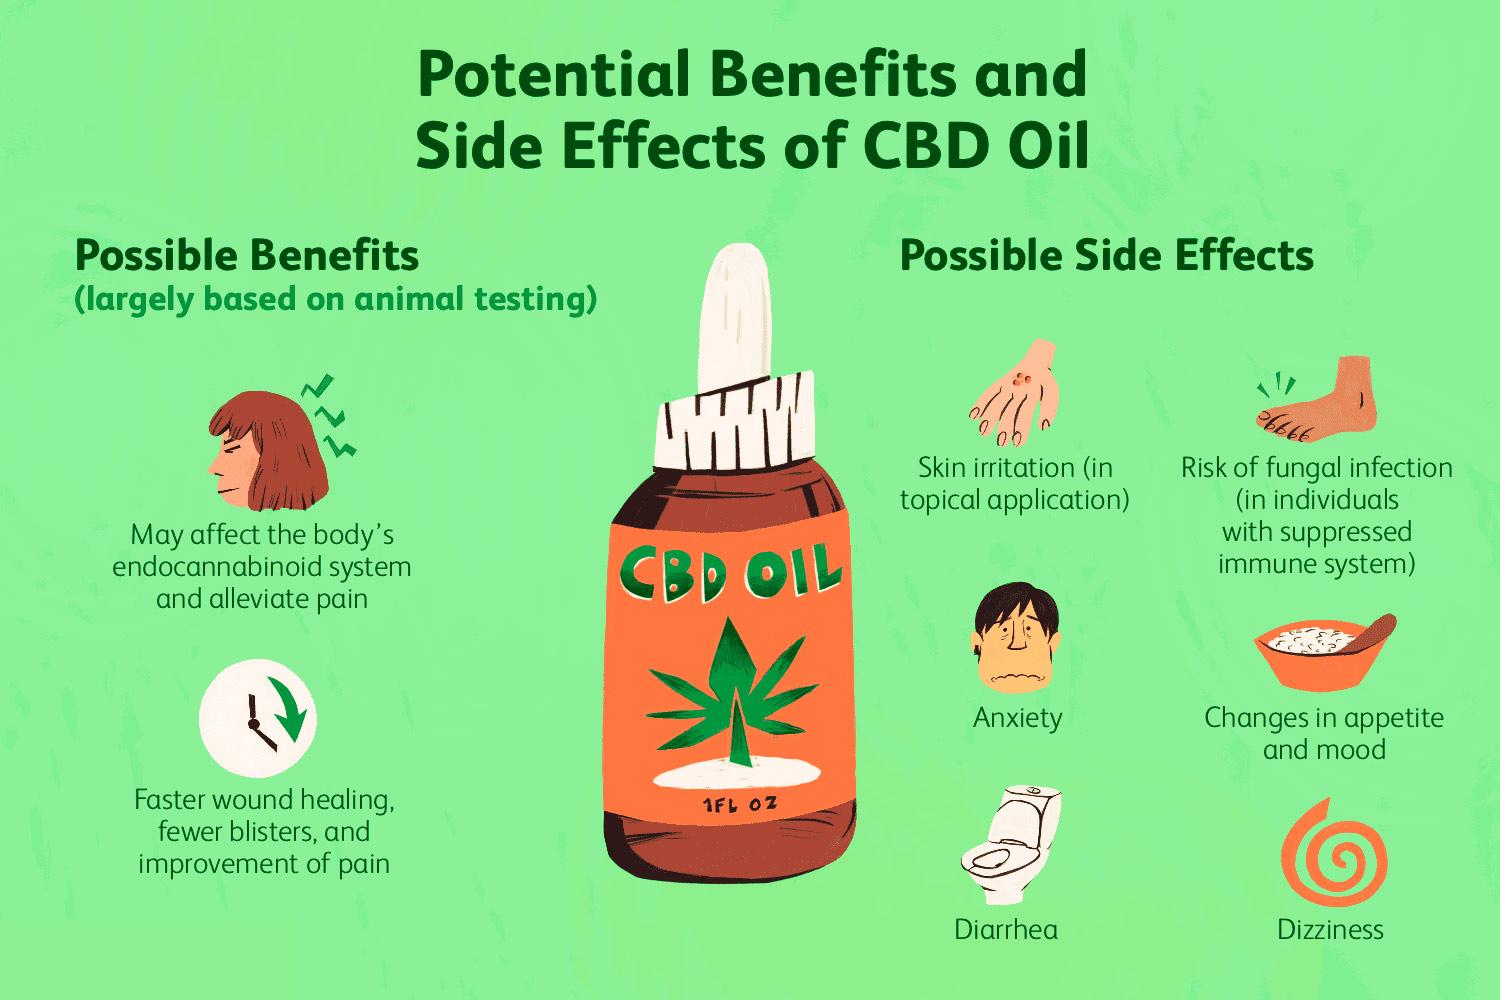 CBD Oil: Health Benefits, Side Effects, and More